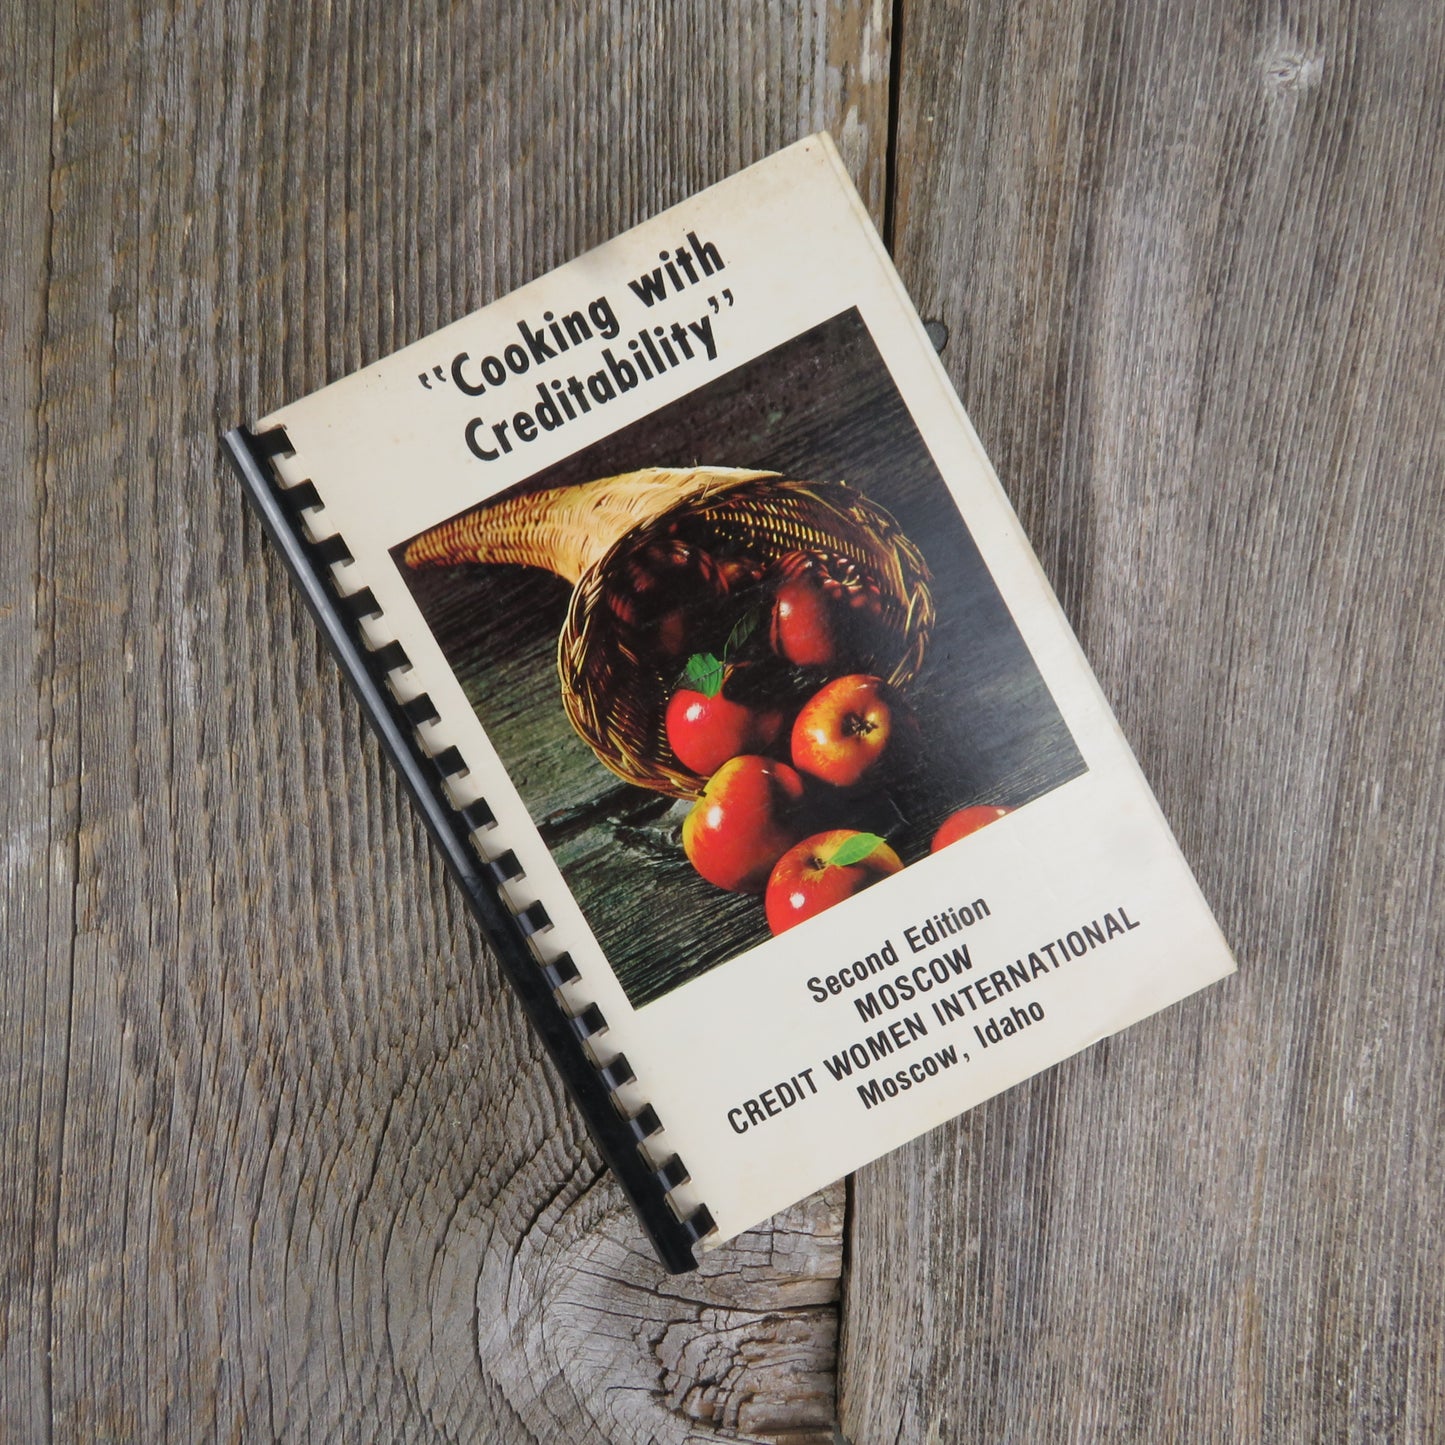 Vintage Idaho Cookbook Moscow Credit Women International Cooking with Creditability 1980 - At Grandma's Table